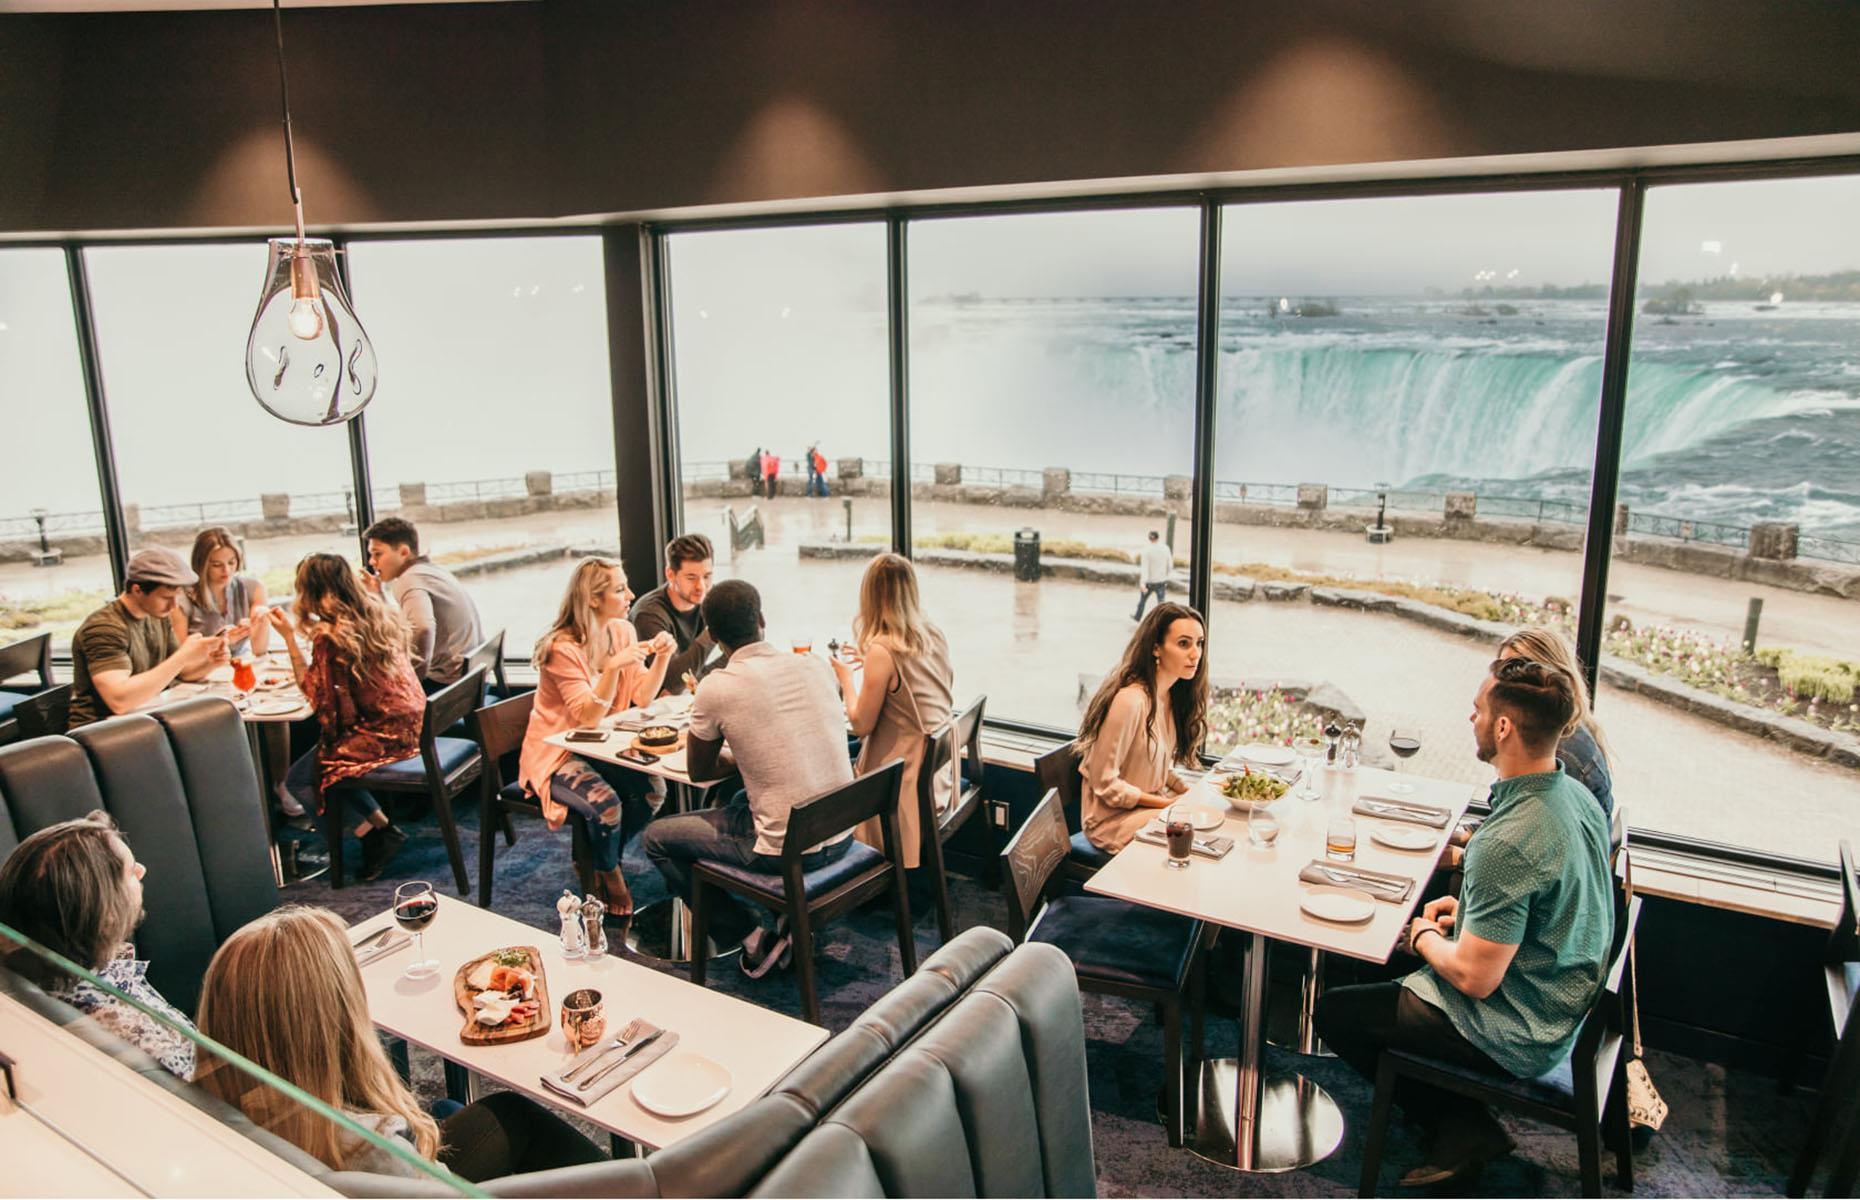 <p>One thing’s for certain, you won’t go hungry in Niagara Falls, and arguably the best seats in town go to <a href="https://www.niagaraparks.com/visit/culinary/table-rock-house-restaurant/">Table Rock House</a>. Directly over the road from Horseshoe Falls, you’re practically perched on the edge of the natural wonder.</p>  <p>For starters, you can’t go wrong with the Ontario burrata, served with pickled aubergine, toasted pine nuts and heirloom tomatoes. The fried vegetable dumplings with kimchi, spring onions and gochujang (red chilli paste) are extremely moreish too.</p>  <p>Burger and sandwich offerings include a chicken schnitzel BLT, Atlantic lobster roll and Canadian prime rib burger. This is a lunch to remember, no matter what you choose.</p>